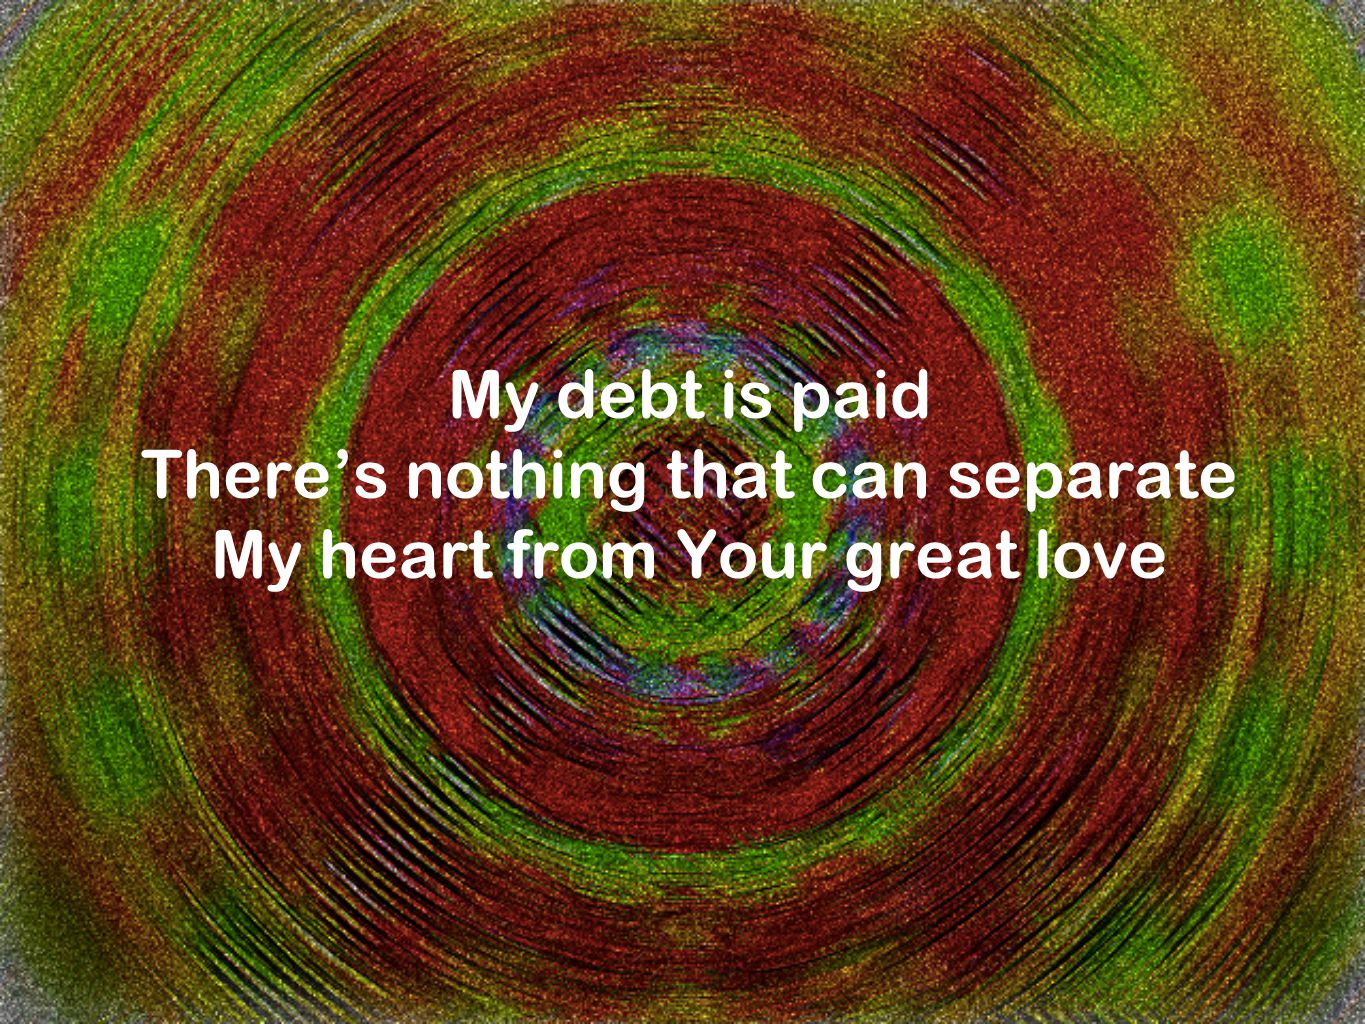 My debt is paid There’s nothing that can separate My heart from Your great love